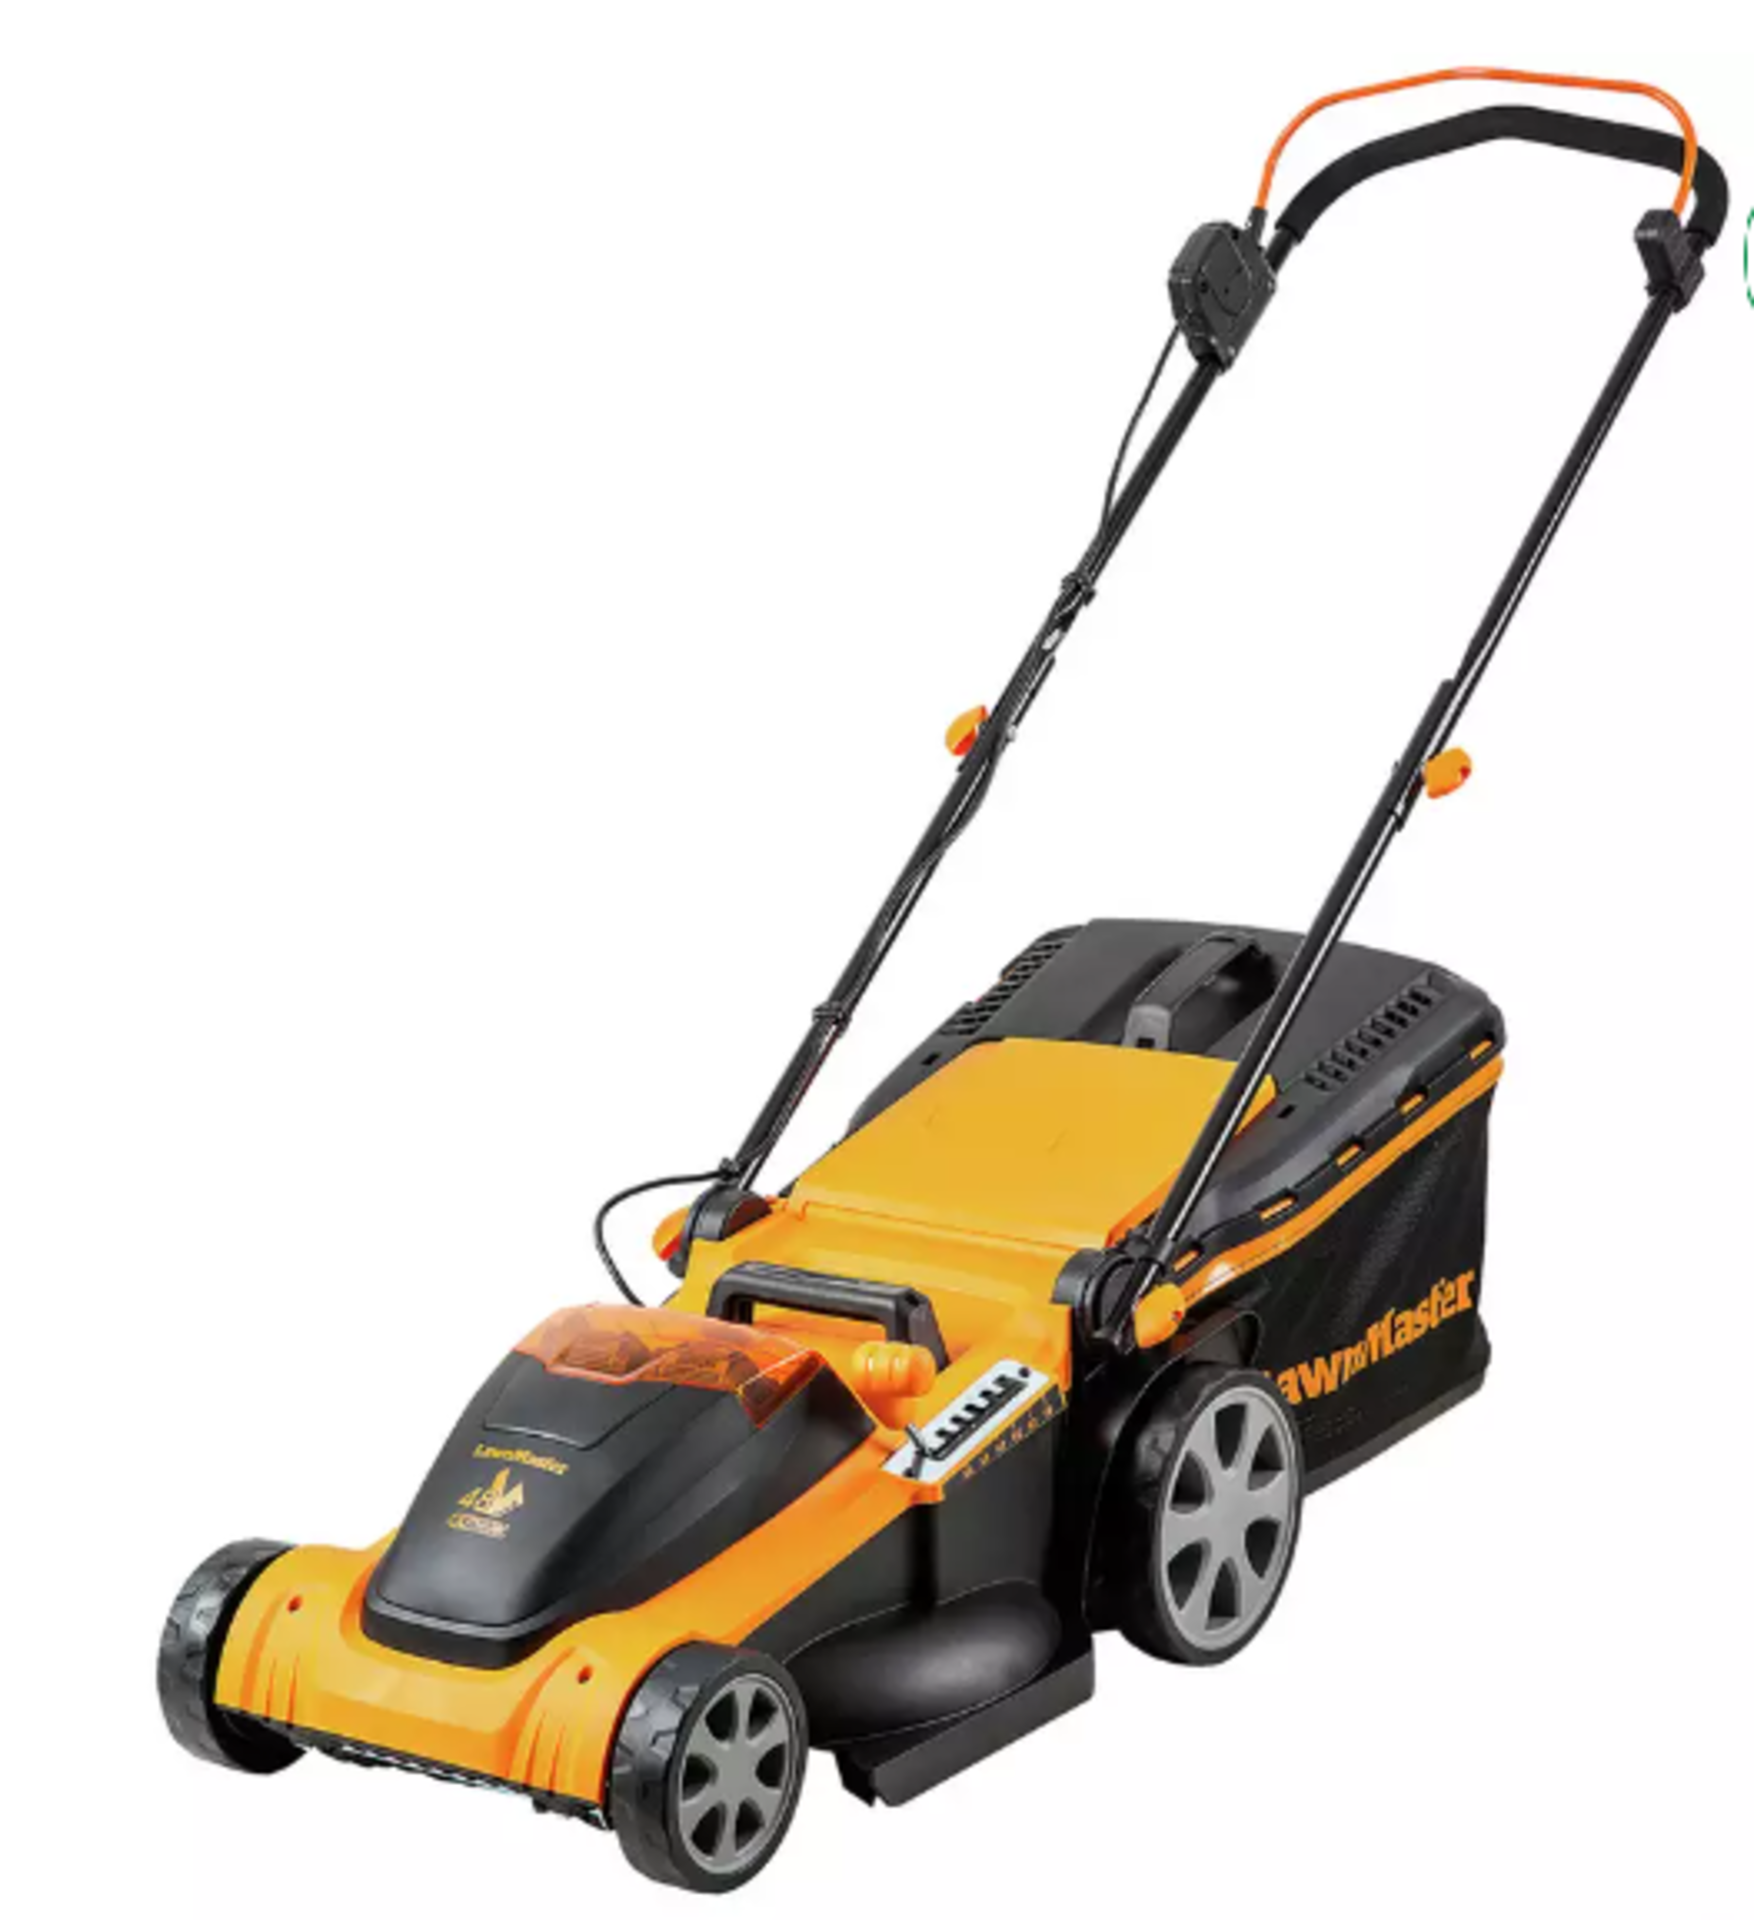 Cleva LawnMaster 48V 41cm Cordless Lawn Mower with Spare Batteries RRP 399.99 About the Product(s)